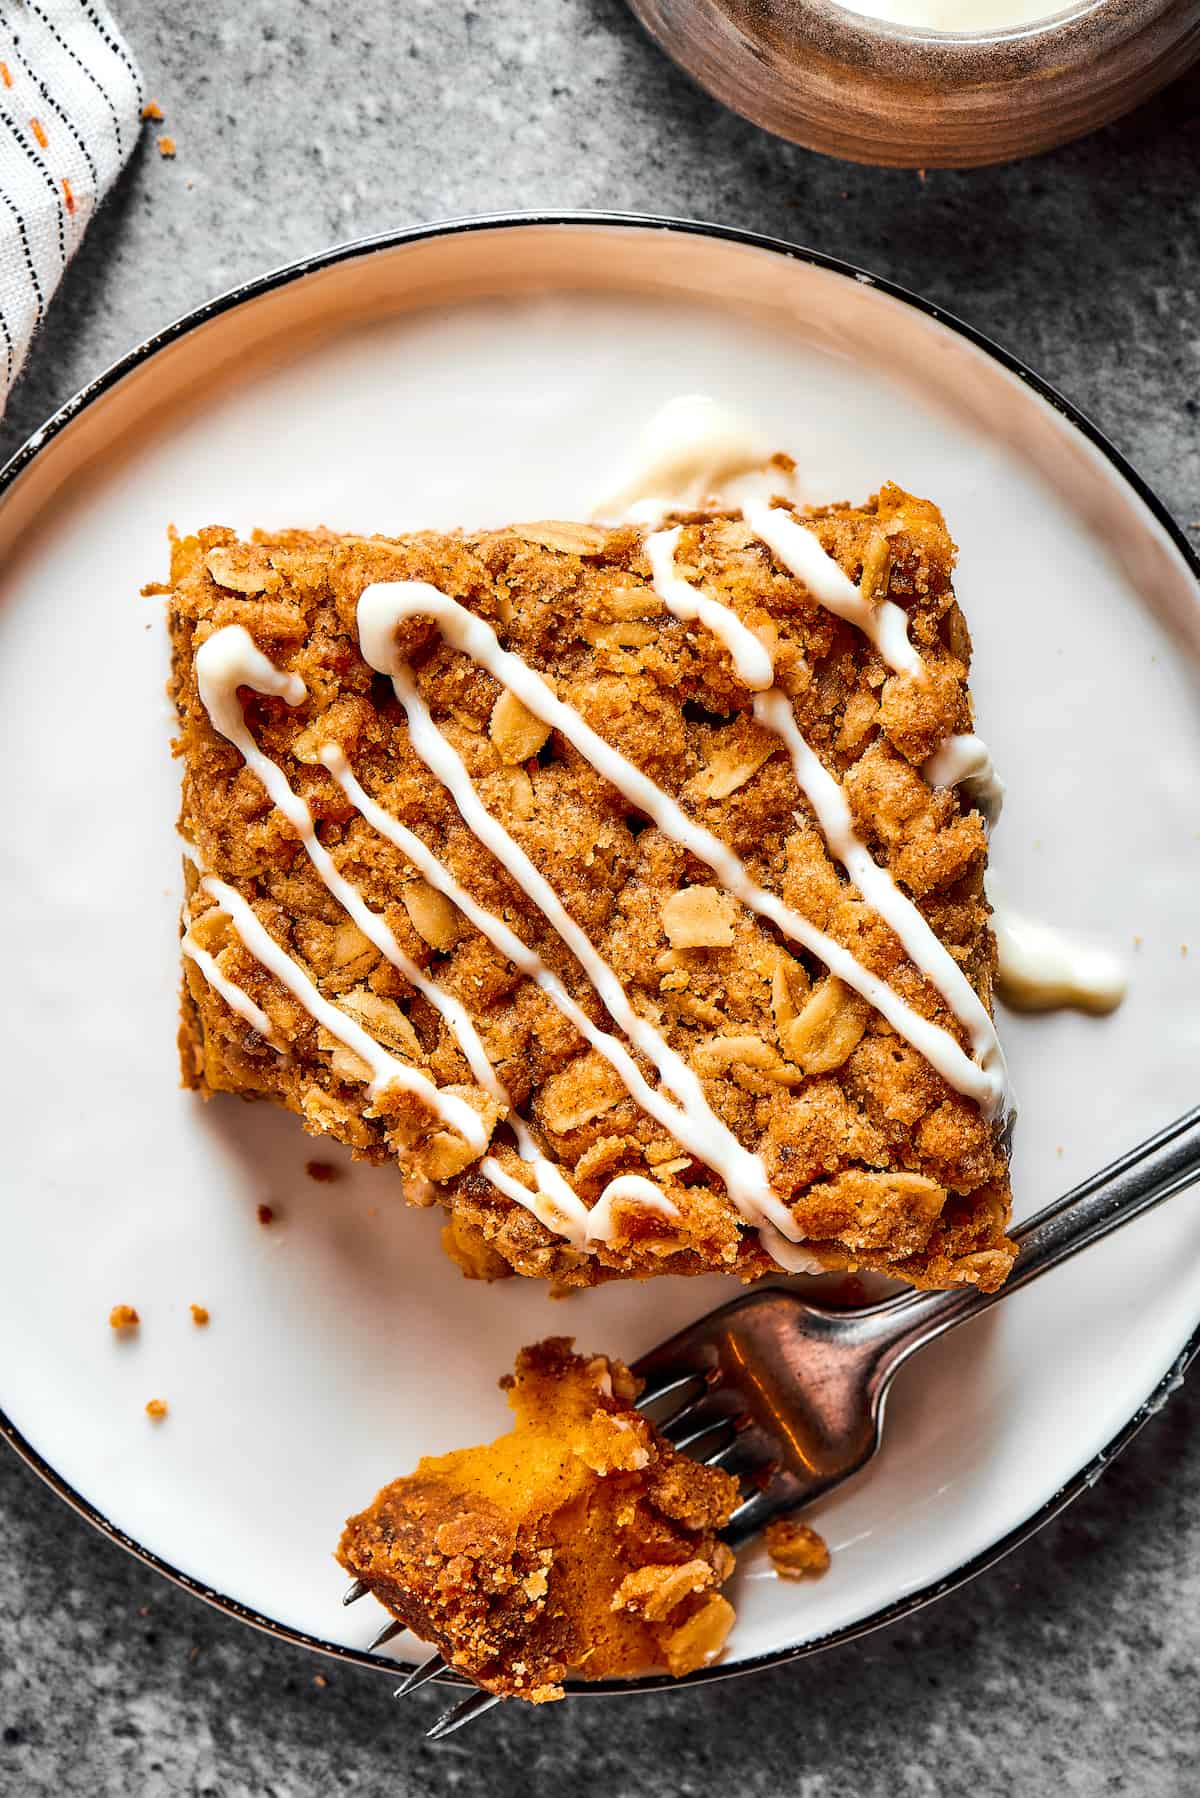 A pumpkin cheesecake square on a plate, with one bite broken off and resting on a fork.